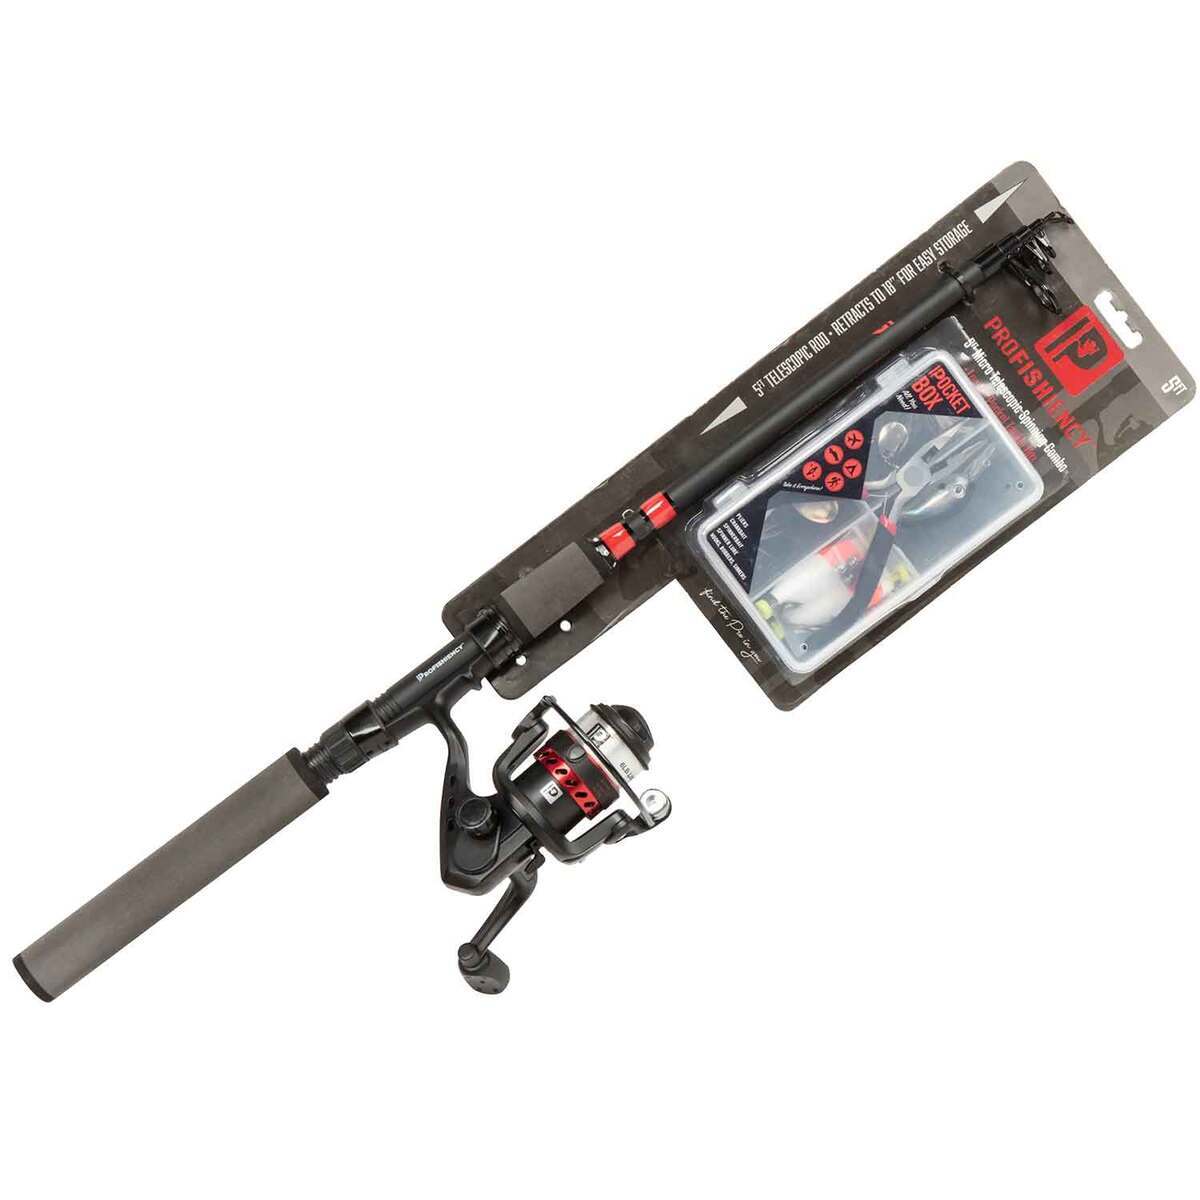 Telescopic Compact Fishing Rod Combo And Reel Kit With Spinning Gear And  Pole Set 230718 From Nian07, $24.29